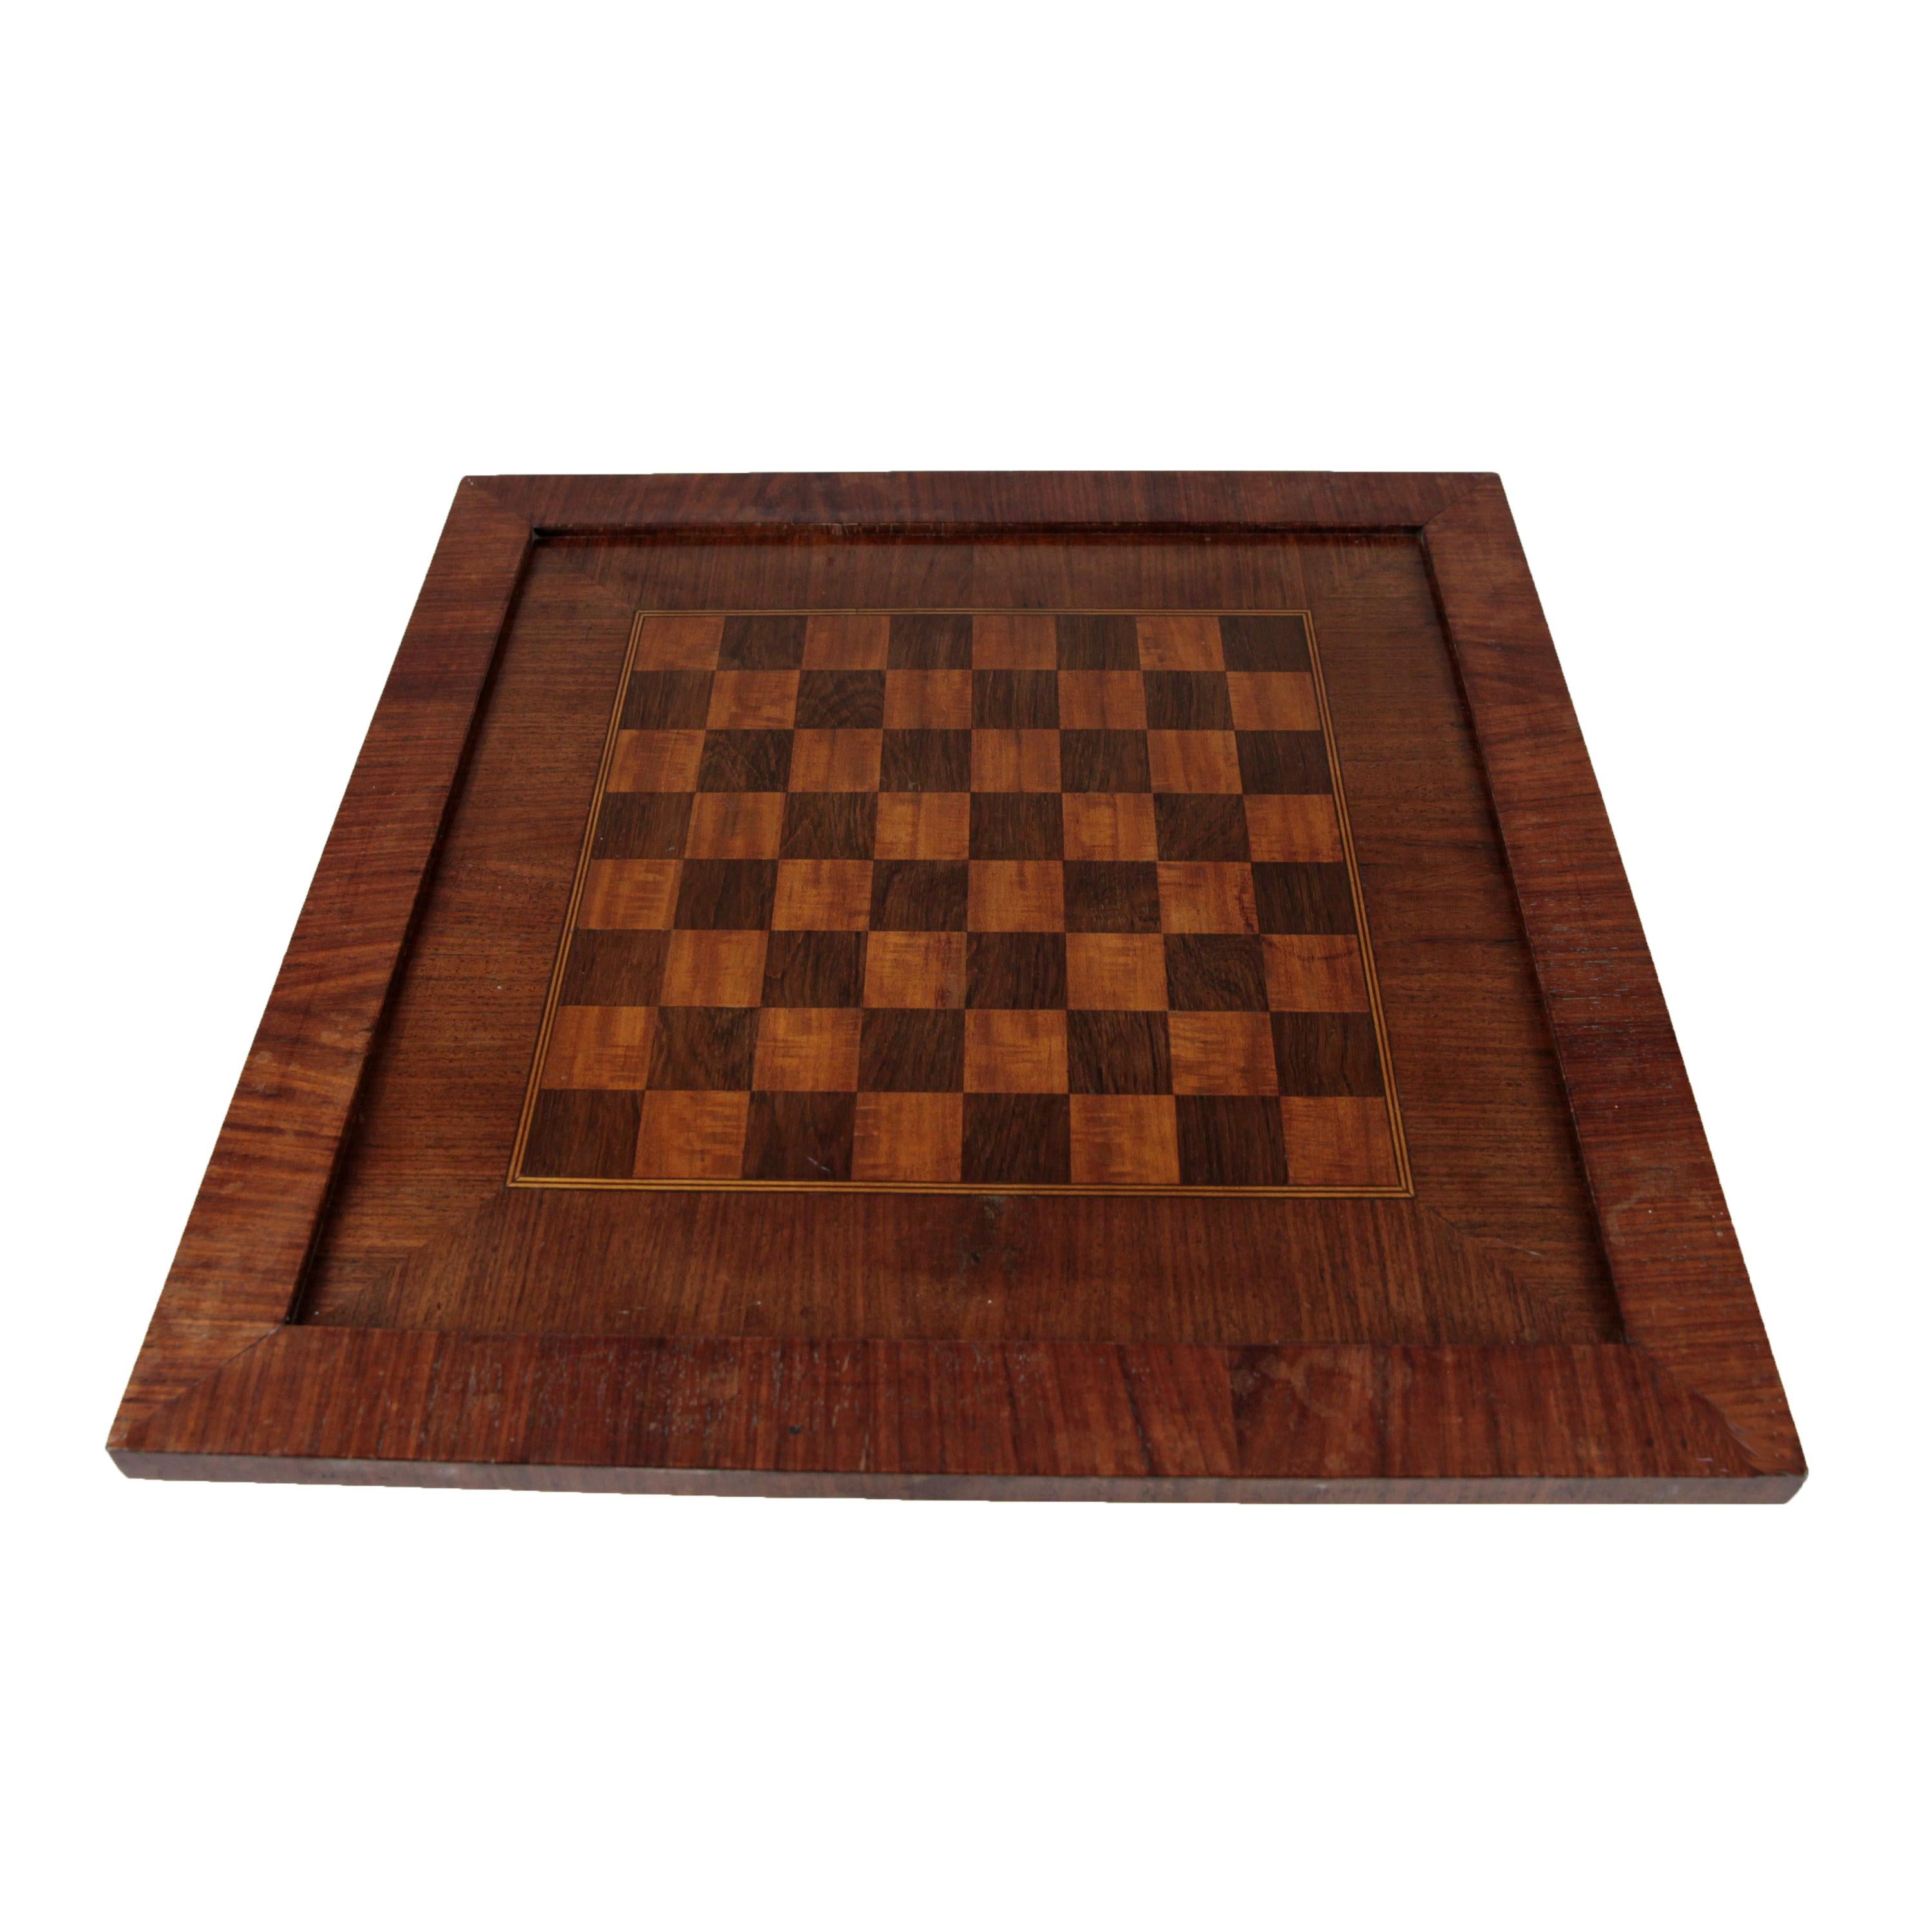 1920s Chess and Play Board, Mahogany and Rosewood Veneer & Marquetry, Red Brown im Angebot